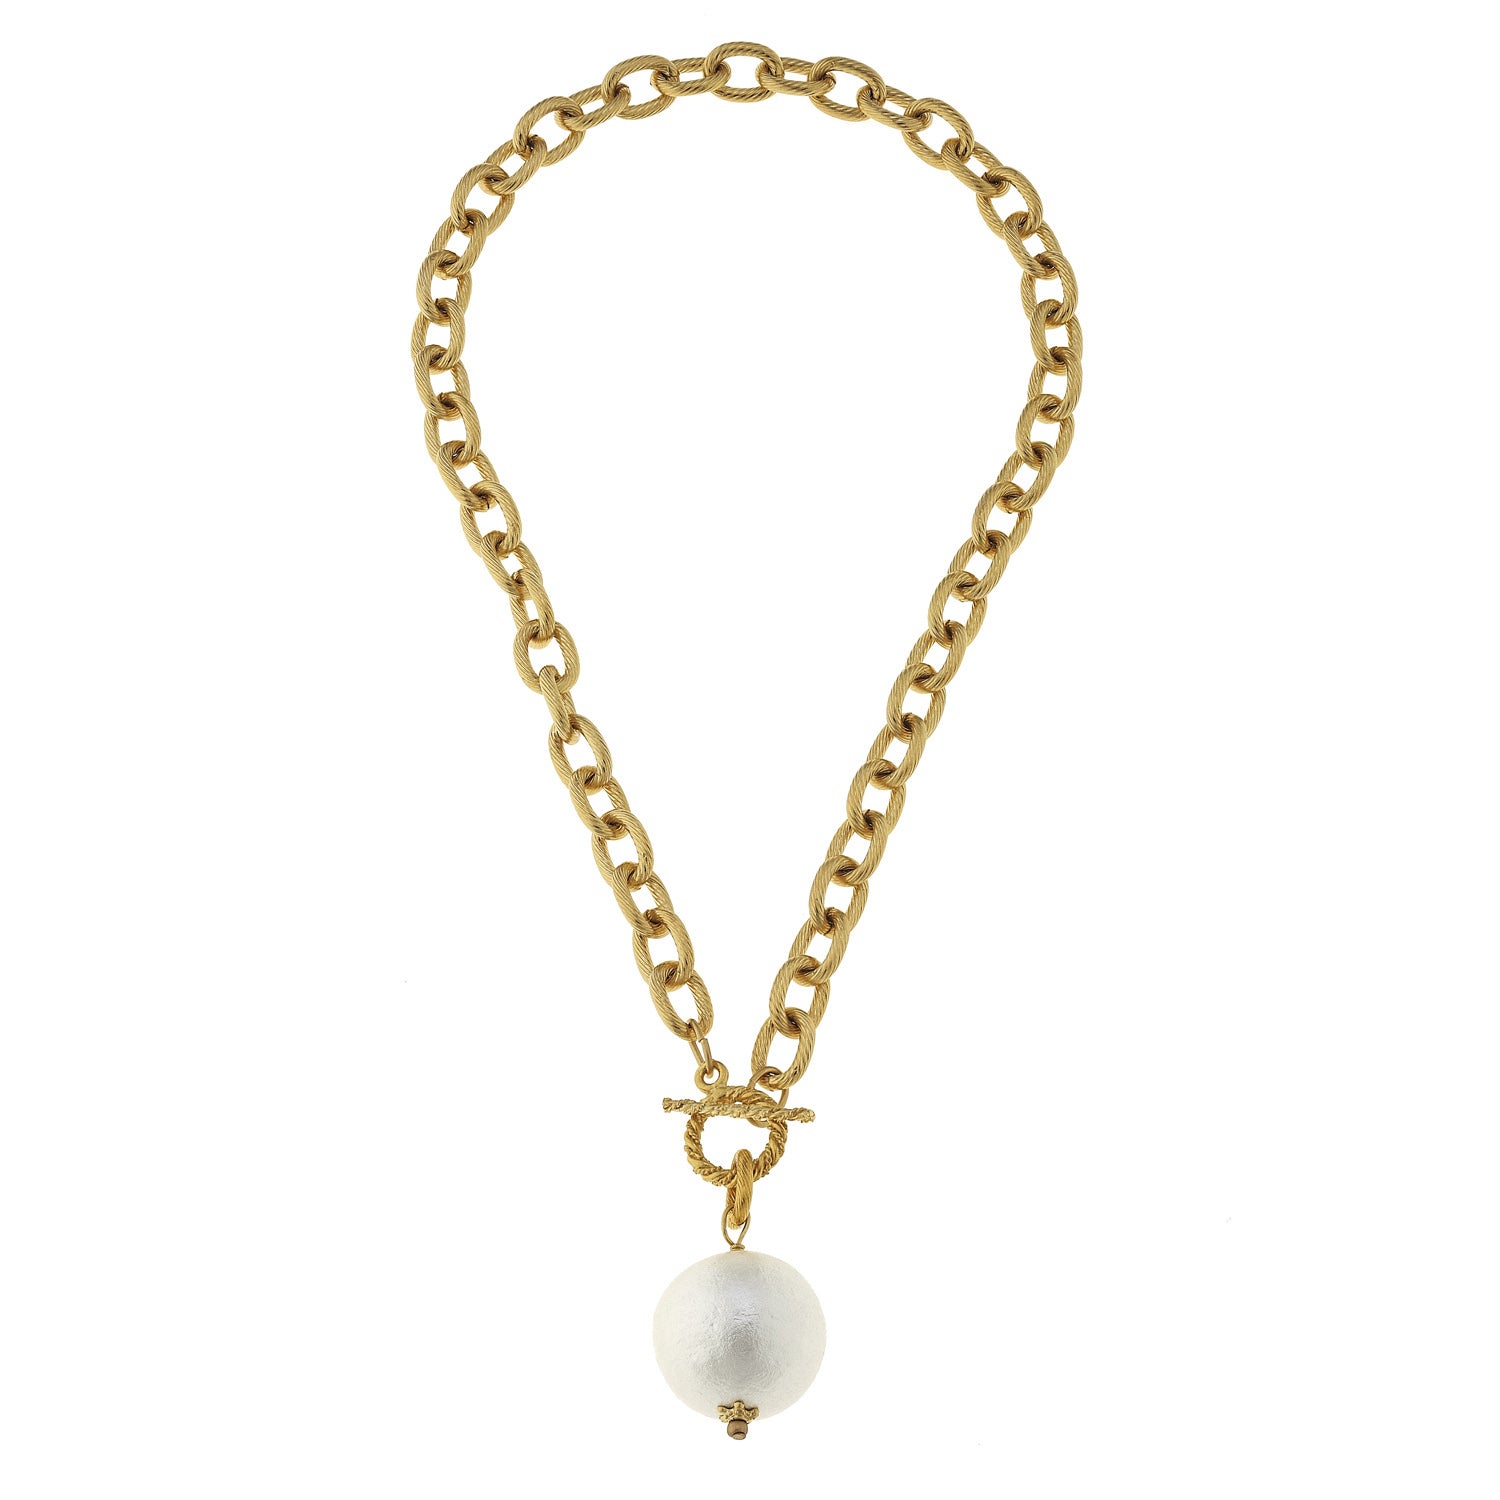 Susan Shaw Jewelry Pearl Necklace, White Cotton Pearl Pendant in Gold